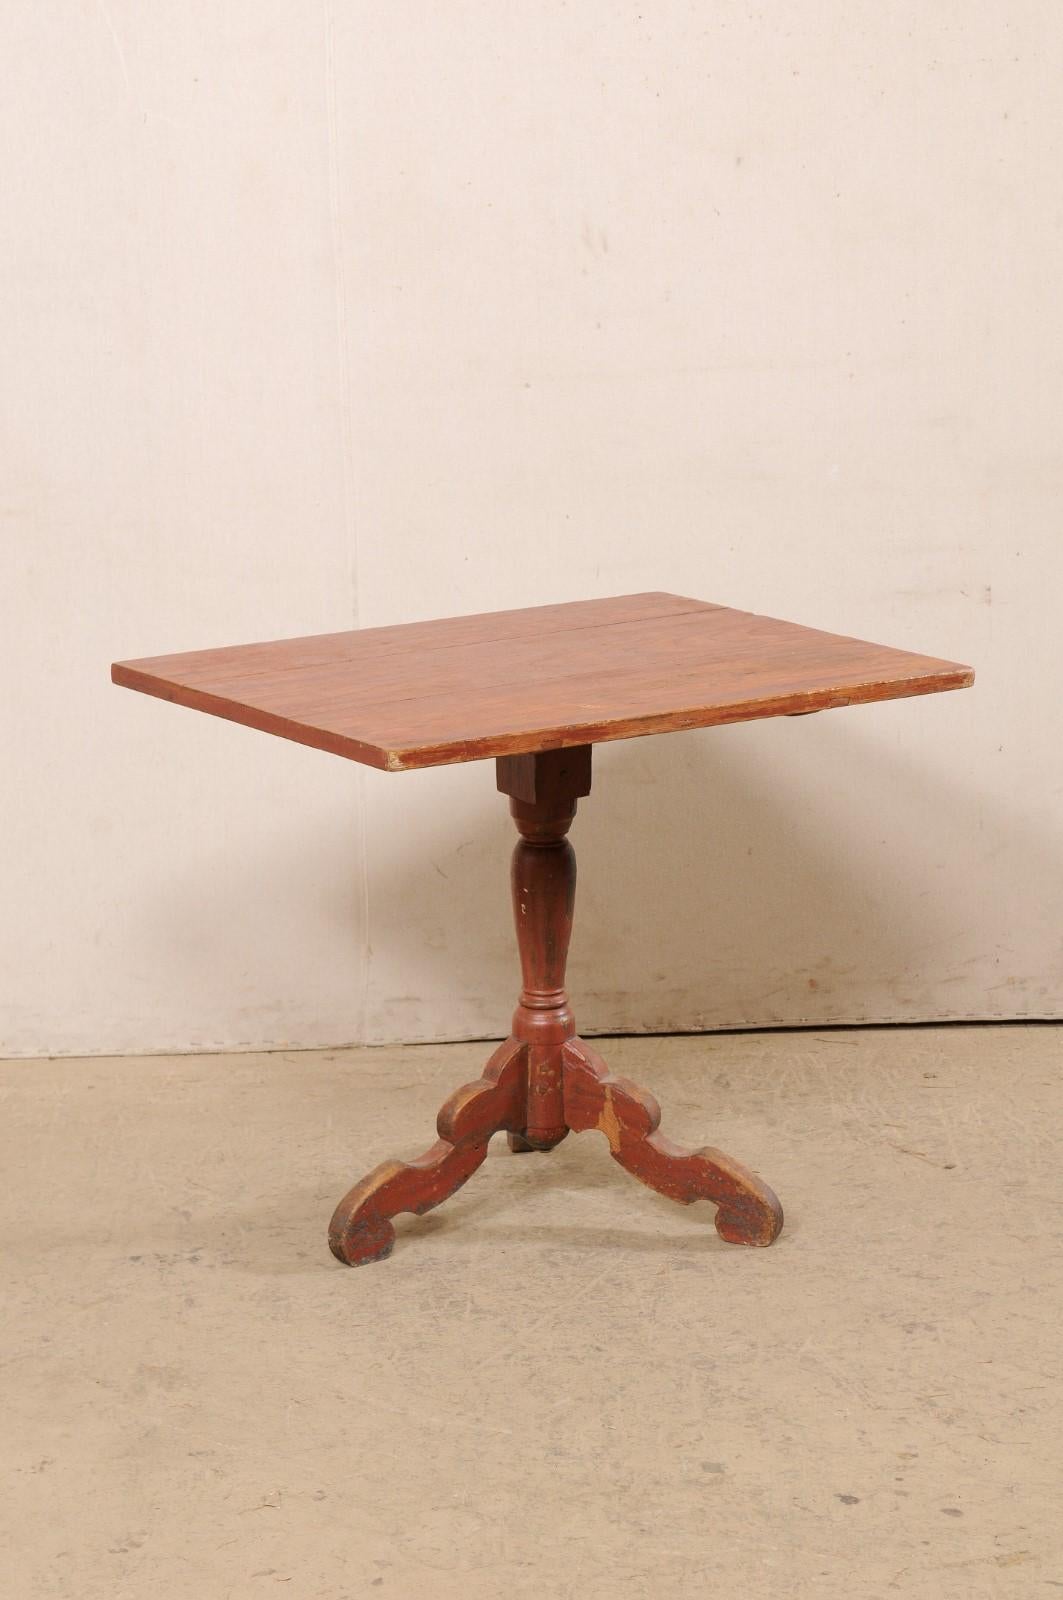 A Swedish tilt-top table with its original paint from the 18th century. This antique table from Sweden features a rectangular-shaped tilt top which rests upon a delicately turned central pedestal column that terminates into a raised tripod base